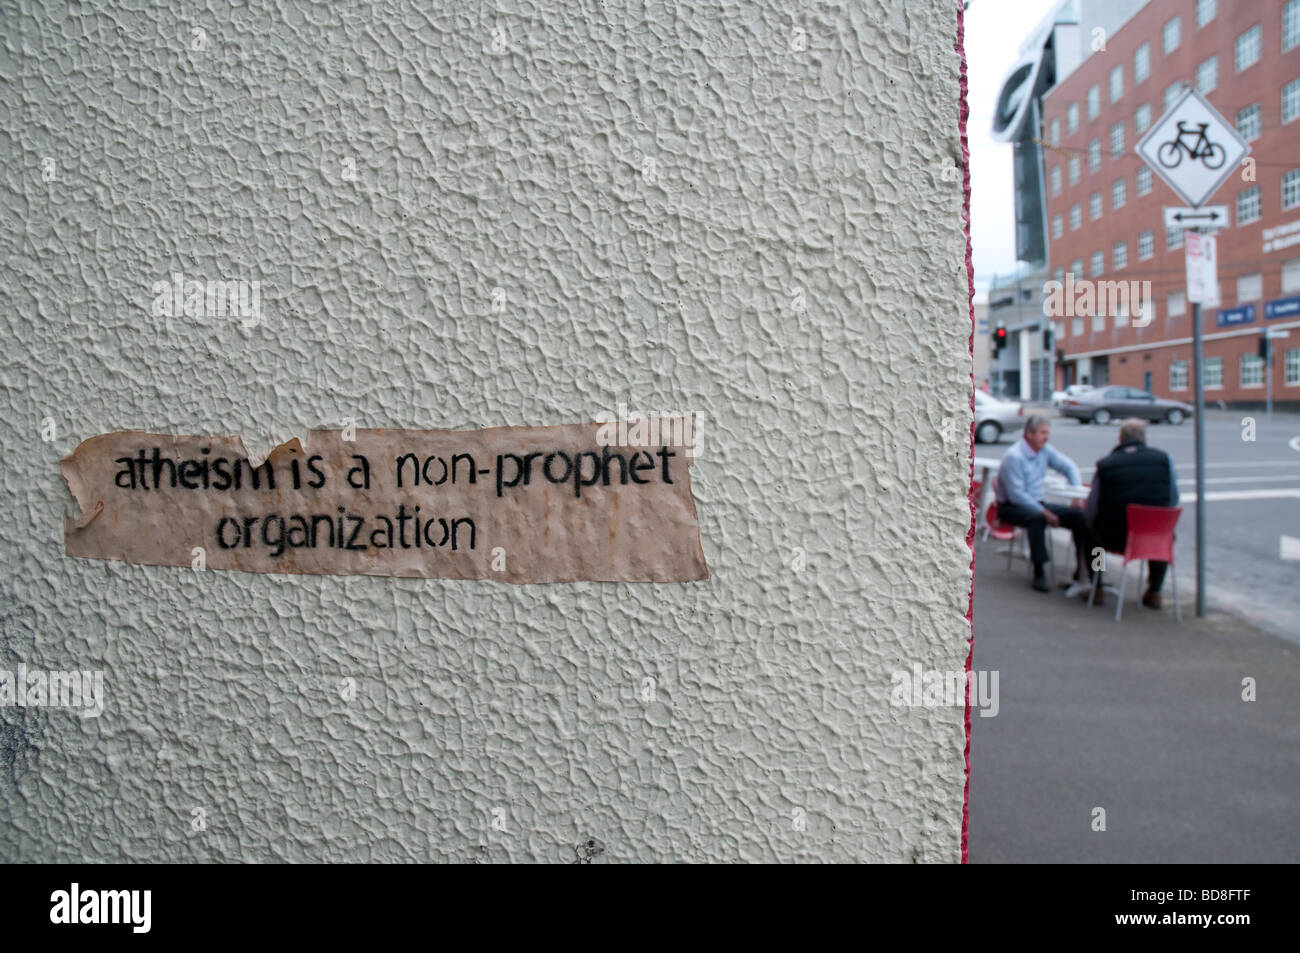 A label promoting atheism stuck to a wall in Melbourne Australia Stock Photo